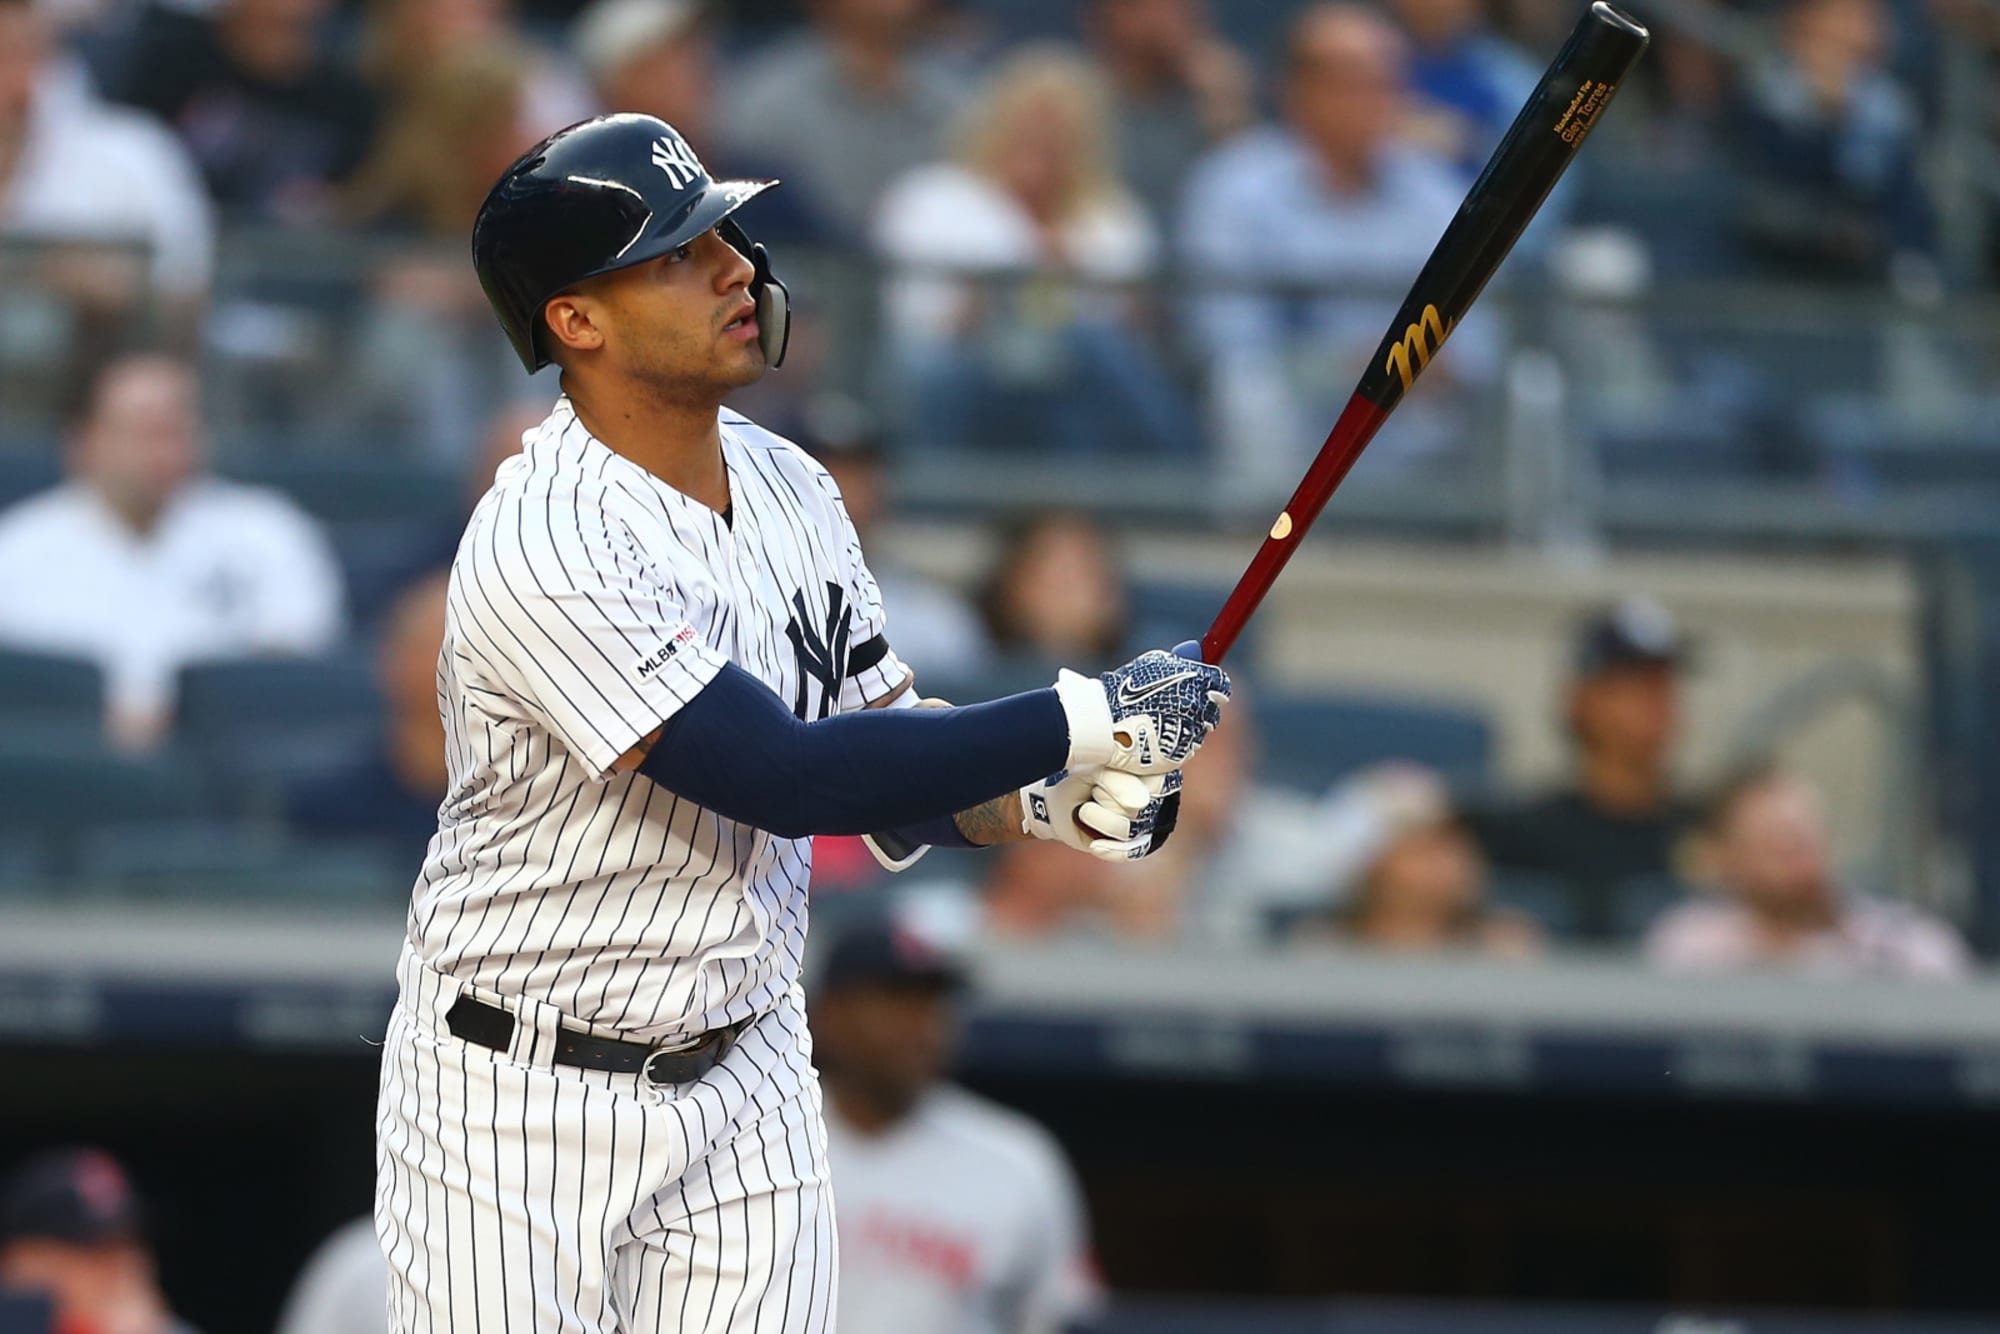 Yankees Gleyber Torres is the Next Face of a Generation of Yankees Players